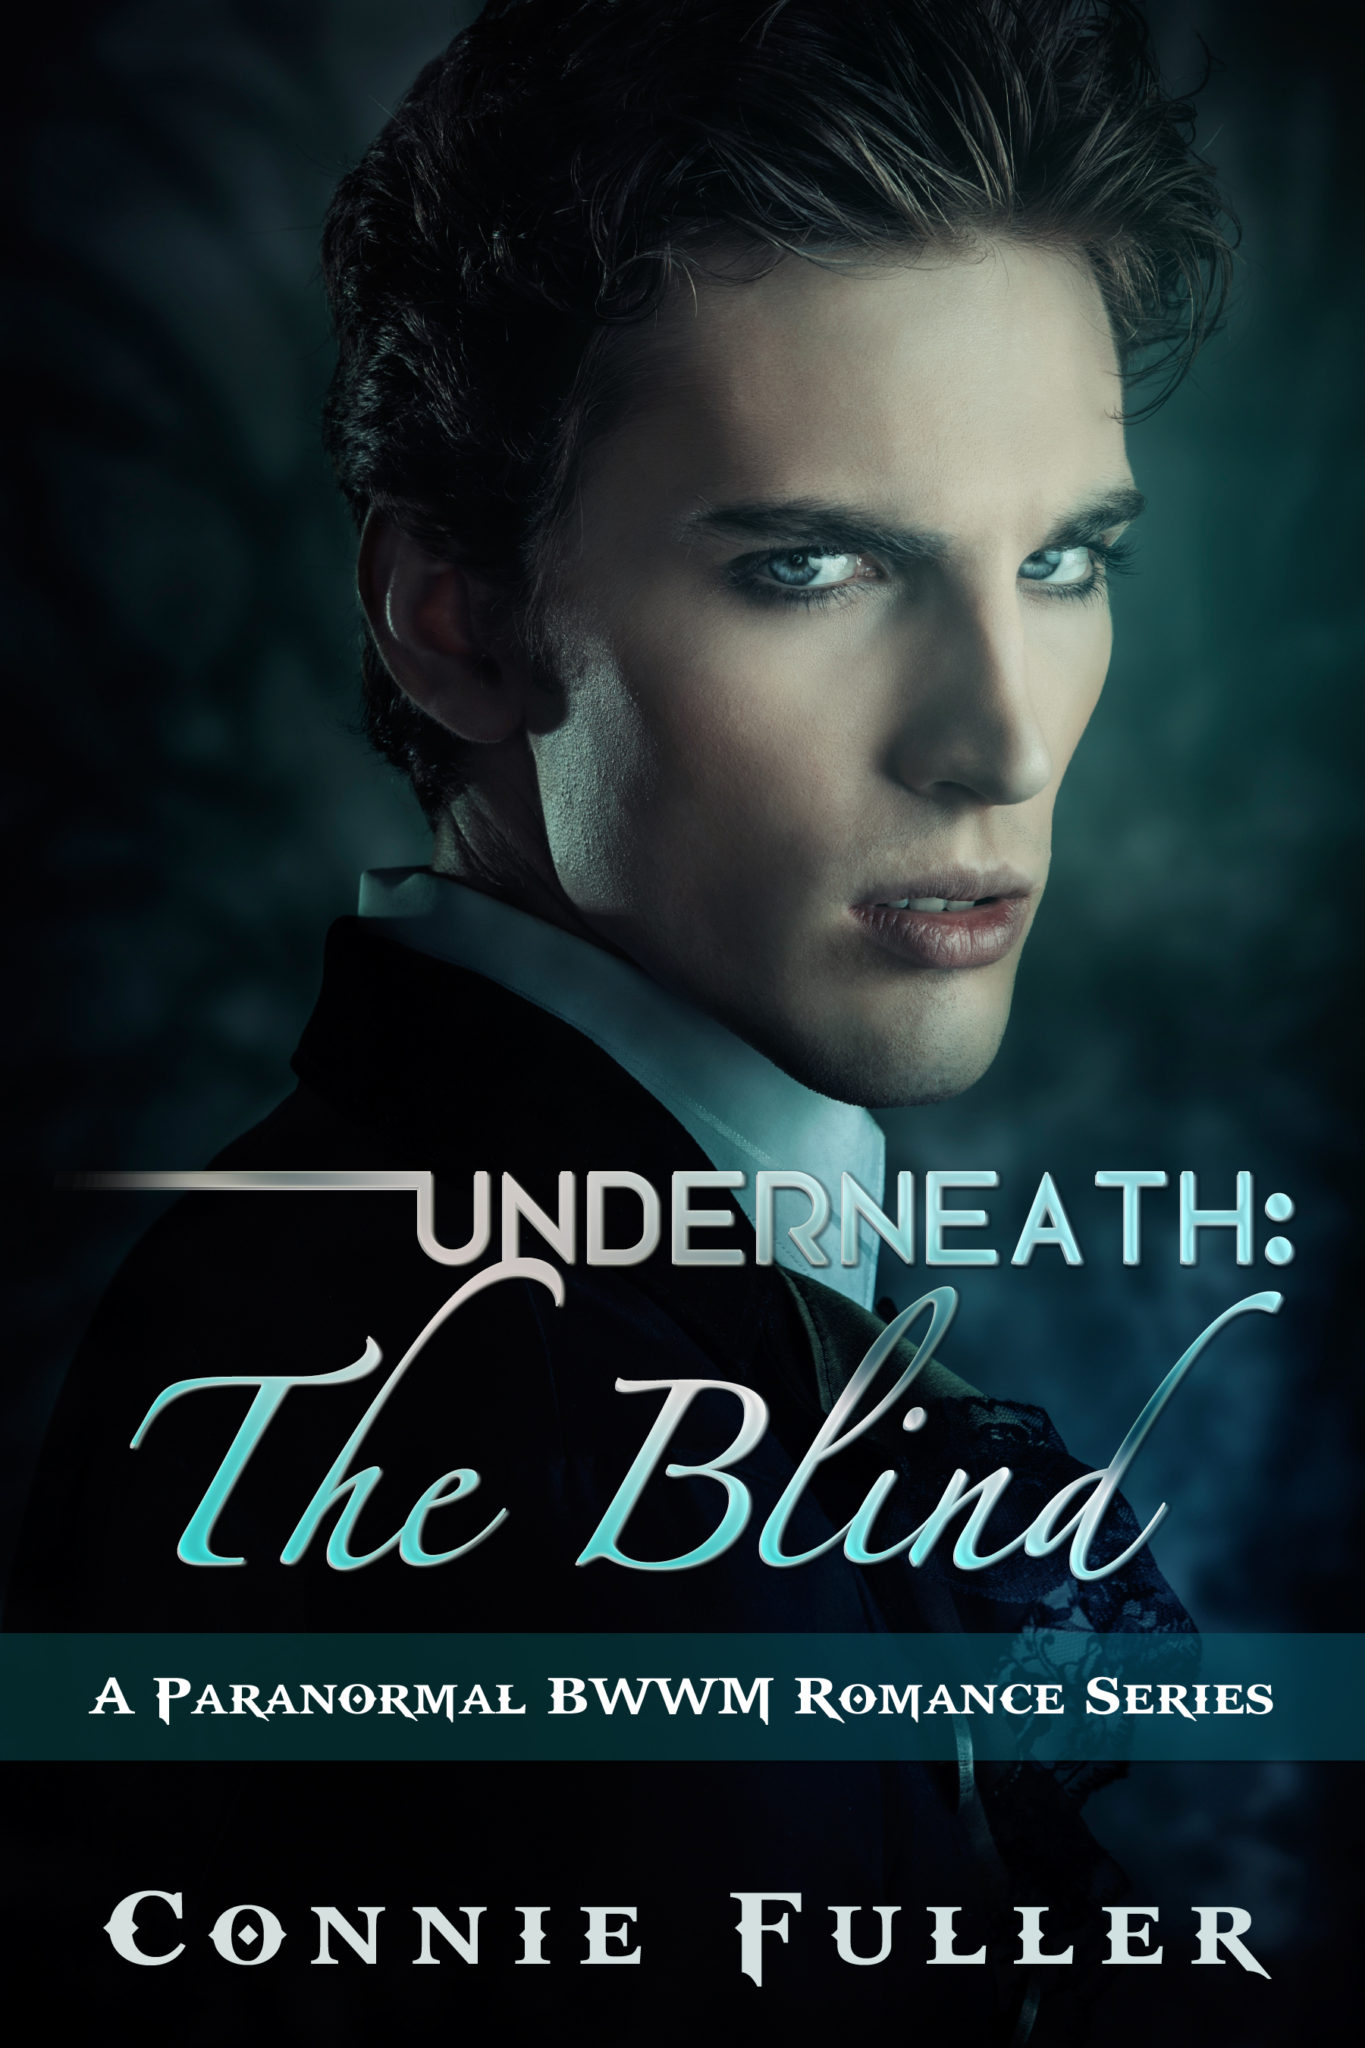 Underneath: The Blind (A Paranormal BWWM Vampire Romance Series Book 1 by Connie Fuller